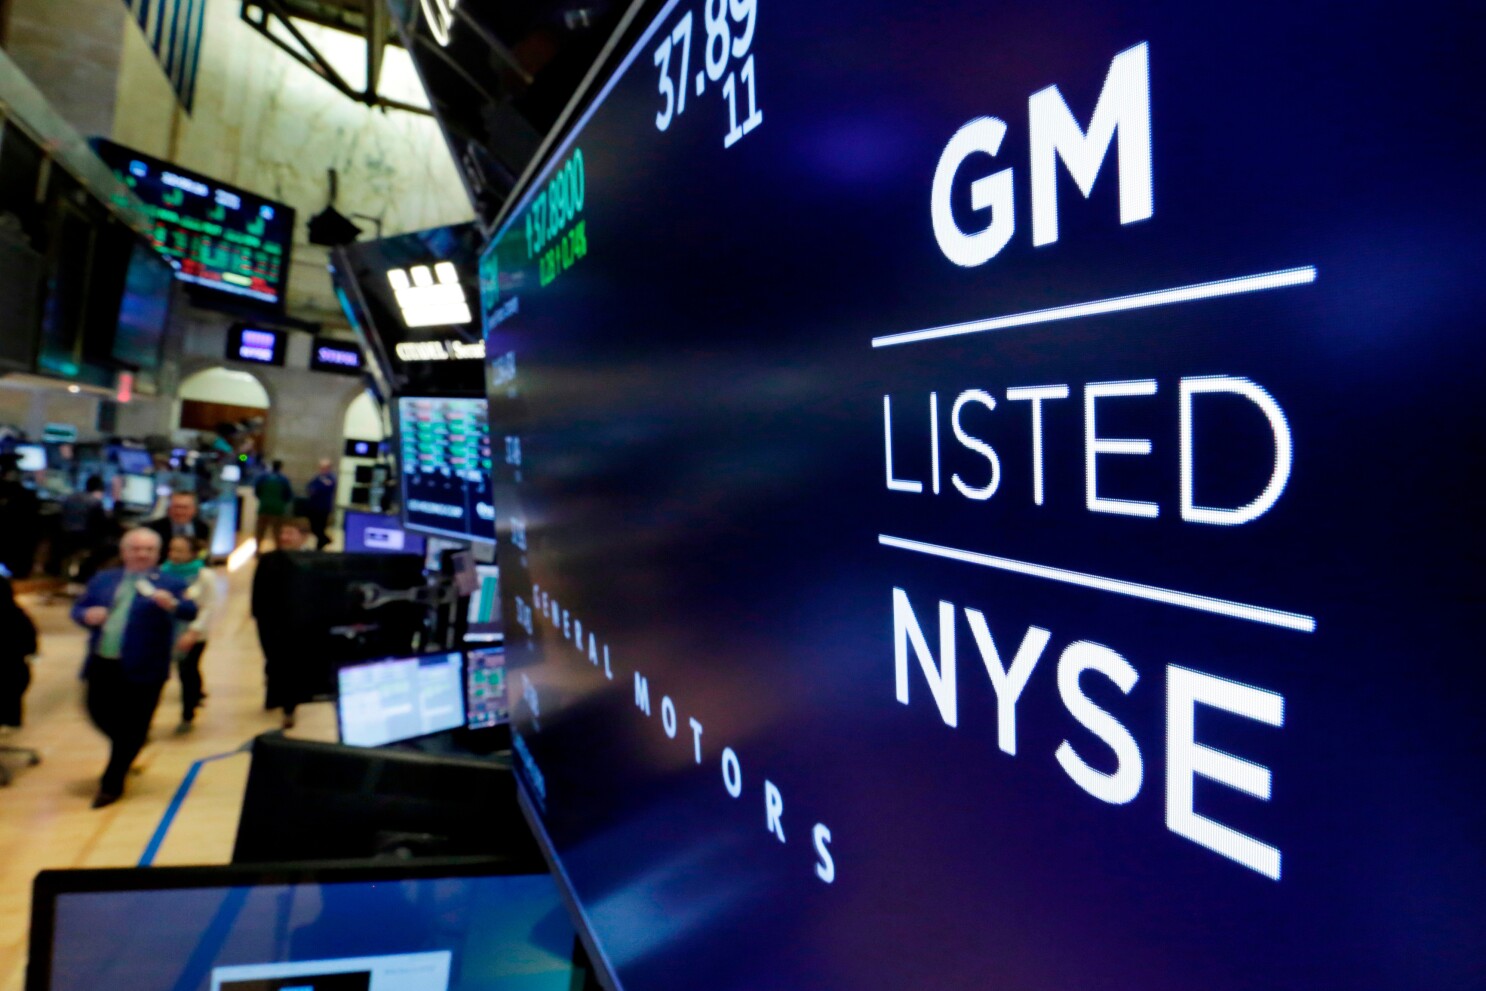 Stock illustrations featuring the GM (General Motors) logo